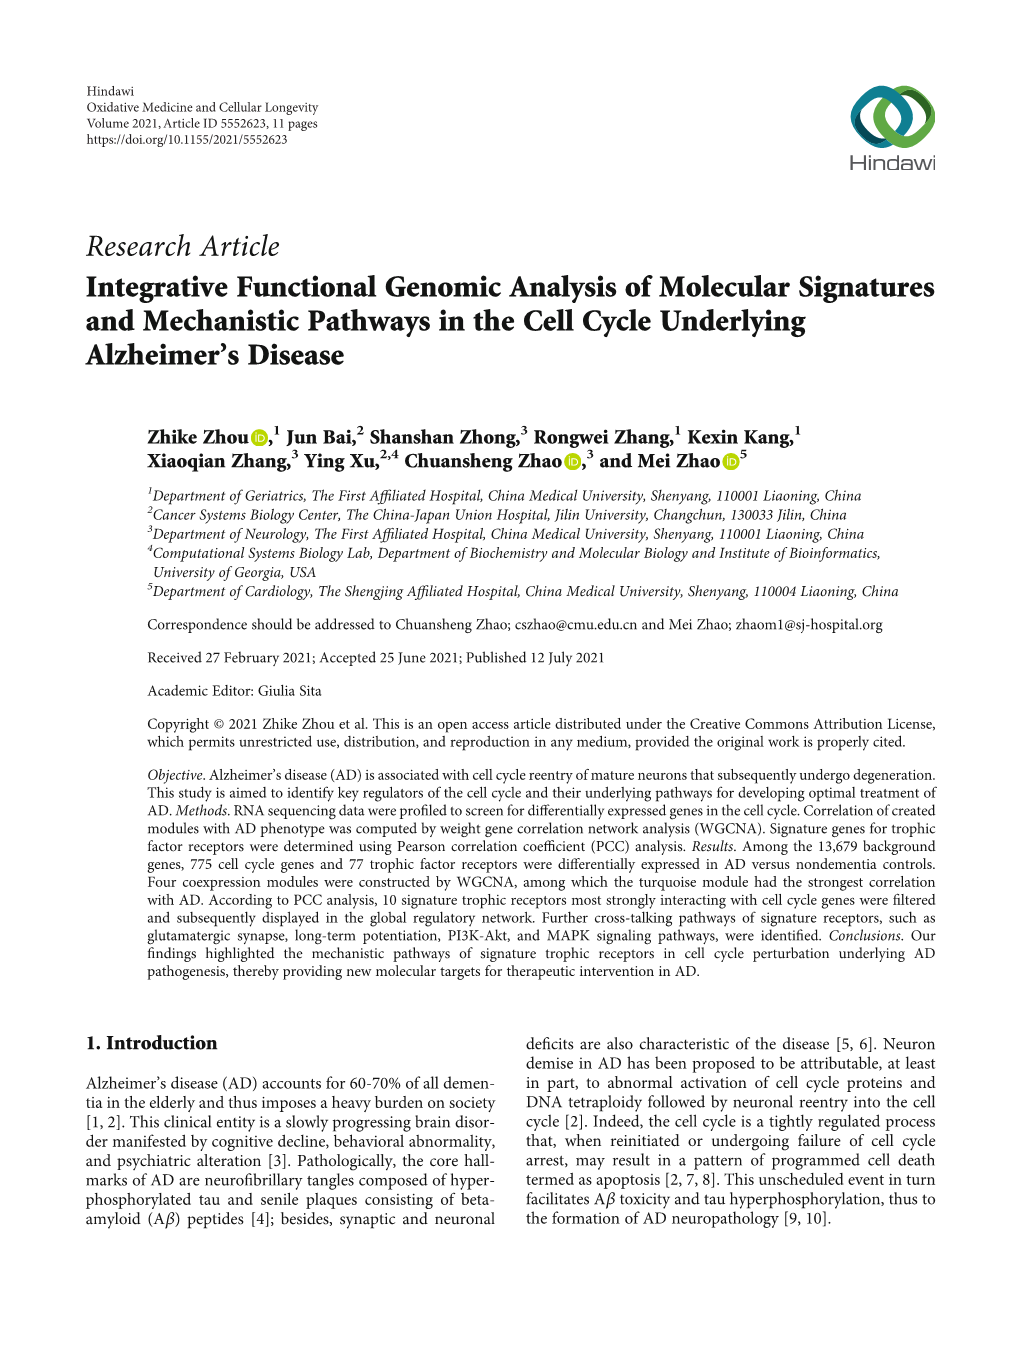 Integrative Functional Genomic Analysis of Molecular Signatures and Mechanistic Pathways in the Cell Cycle Underlying Alzheimer’S Disease